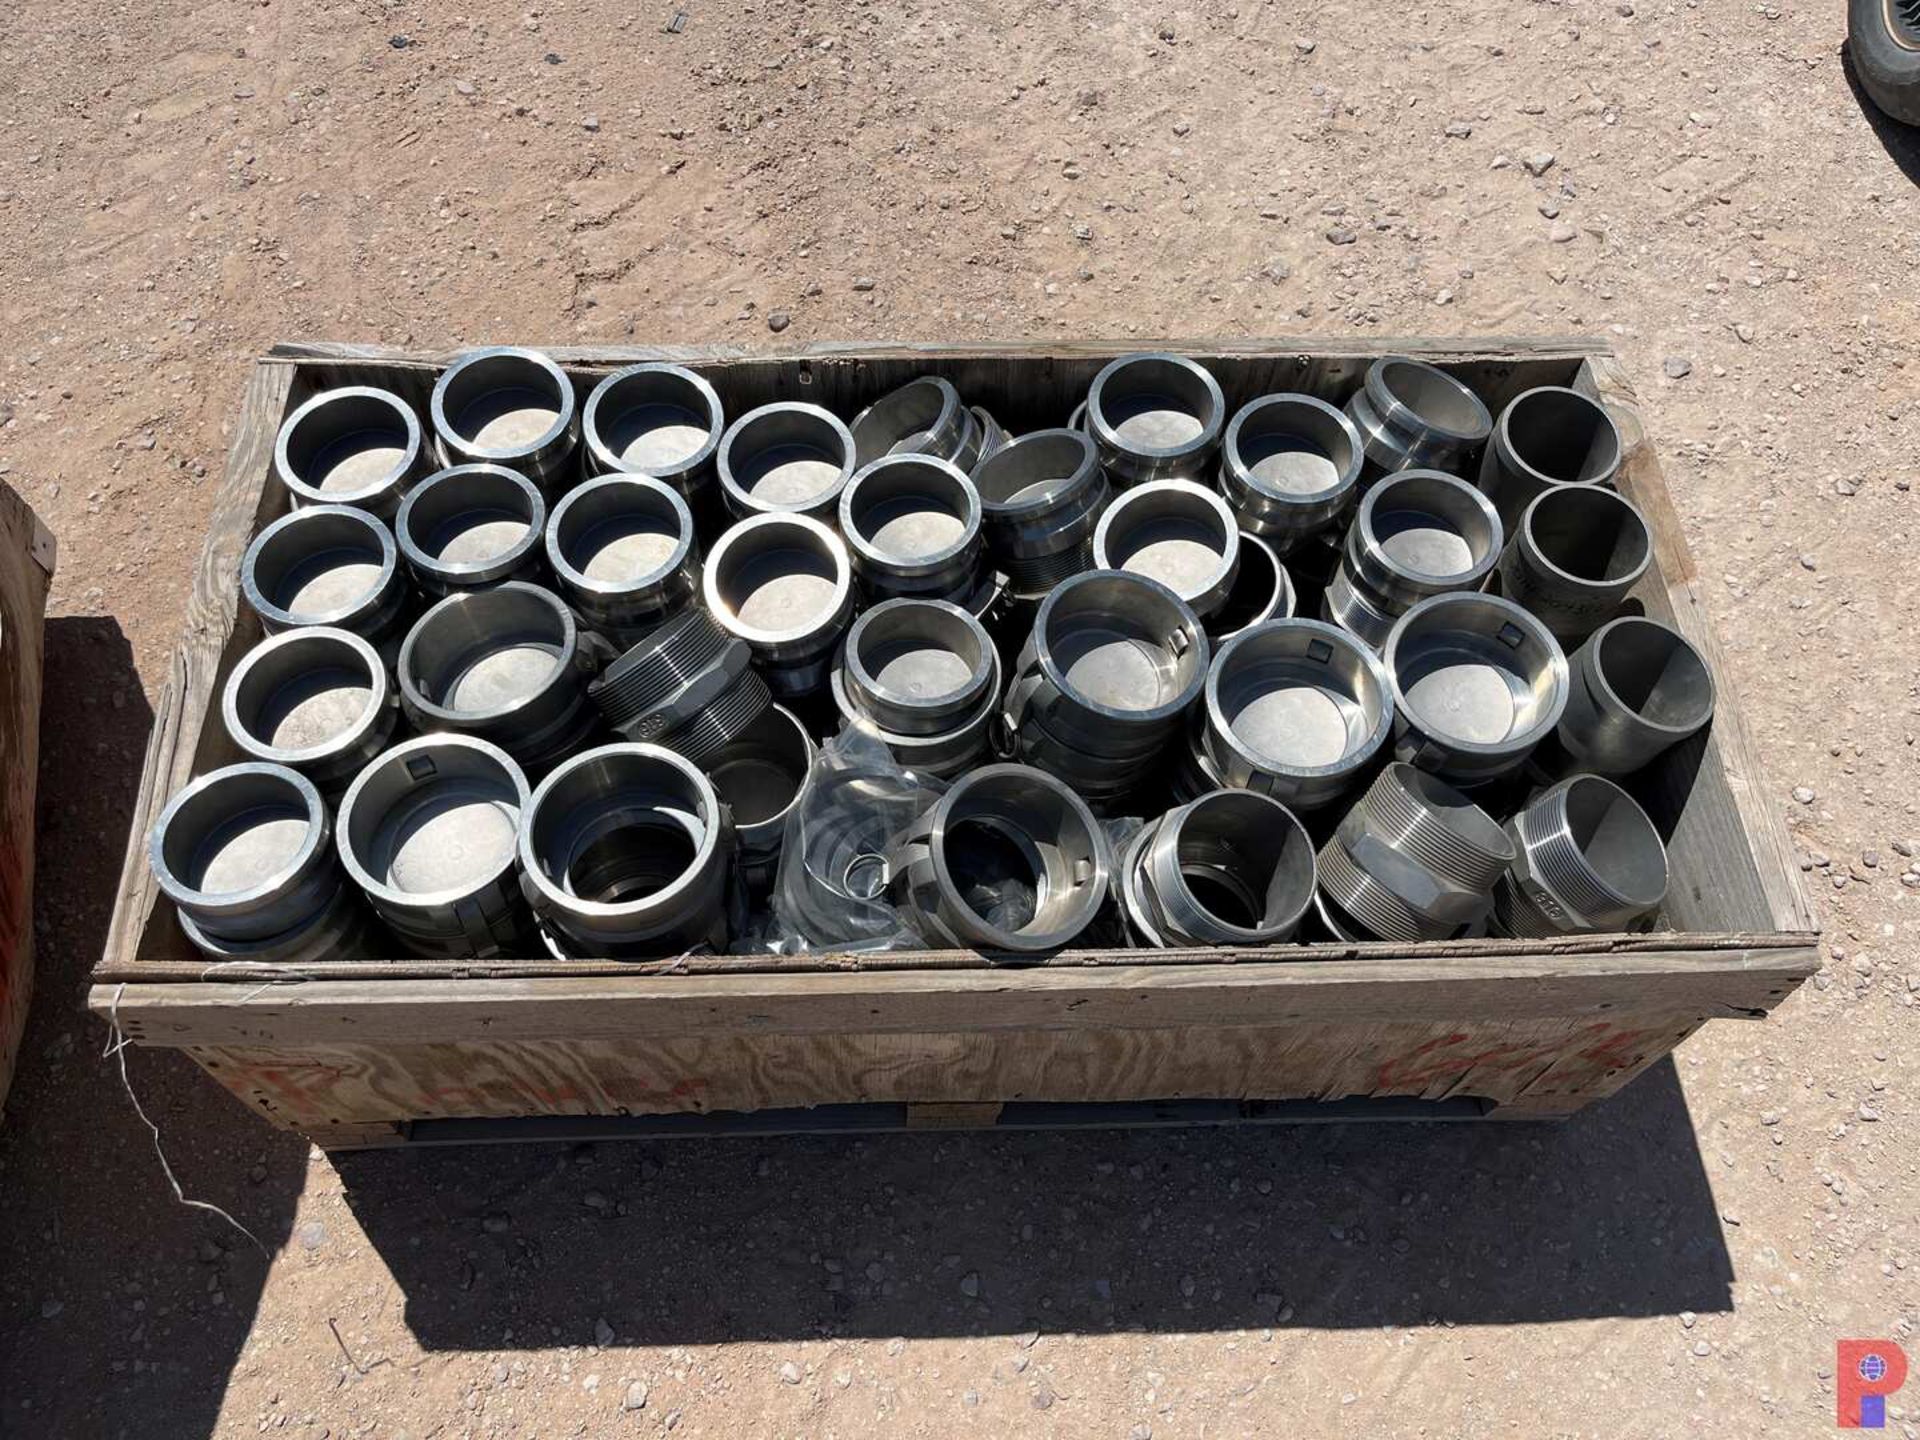 CRATE OF STAINLESS STEEL HOSE COUPLINGS - Image 3 of 3